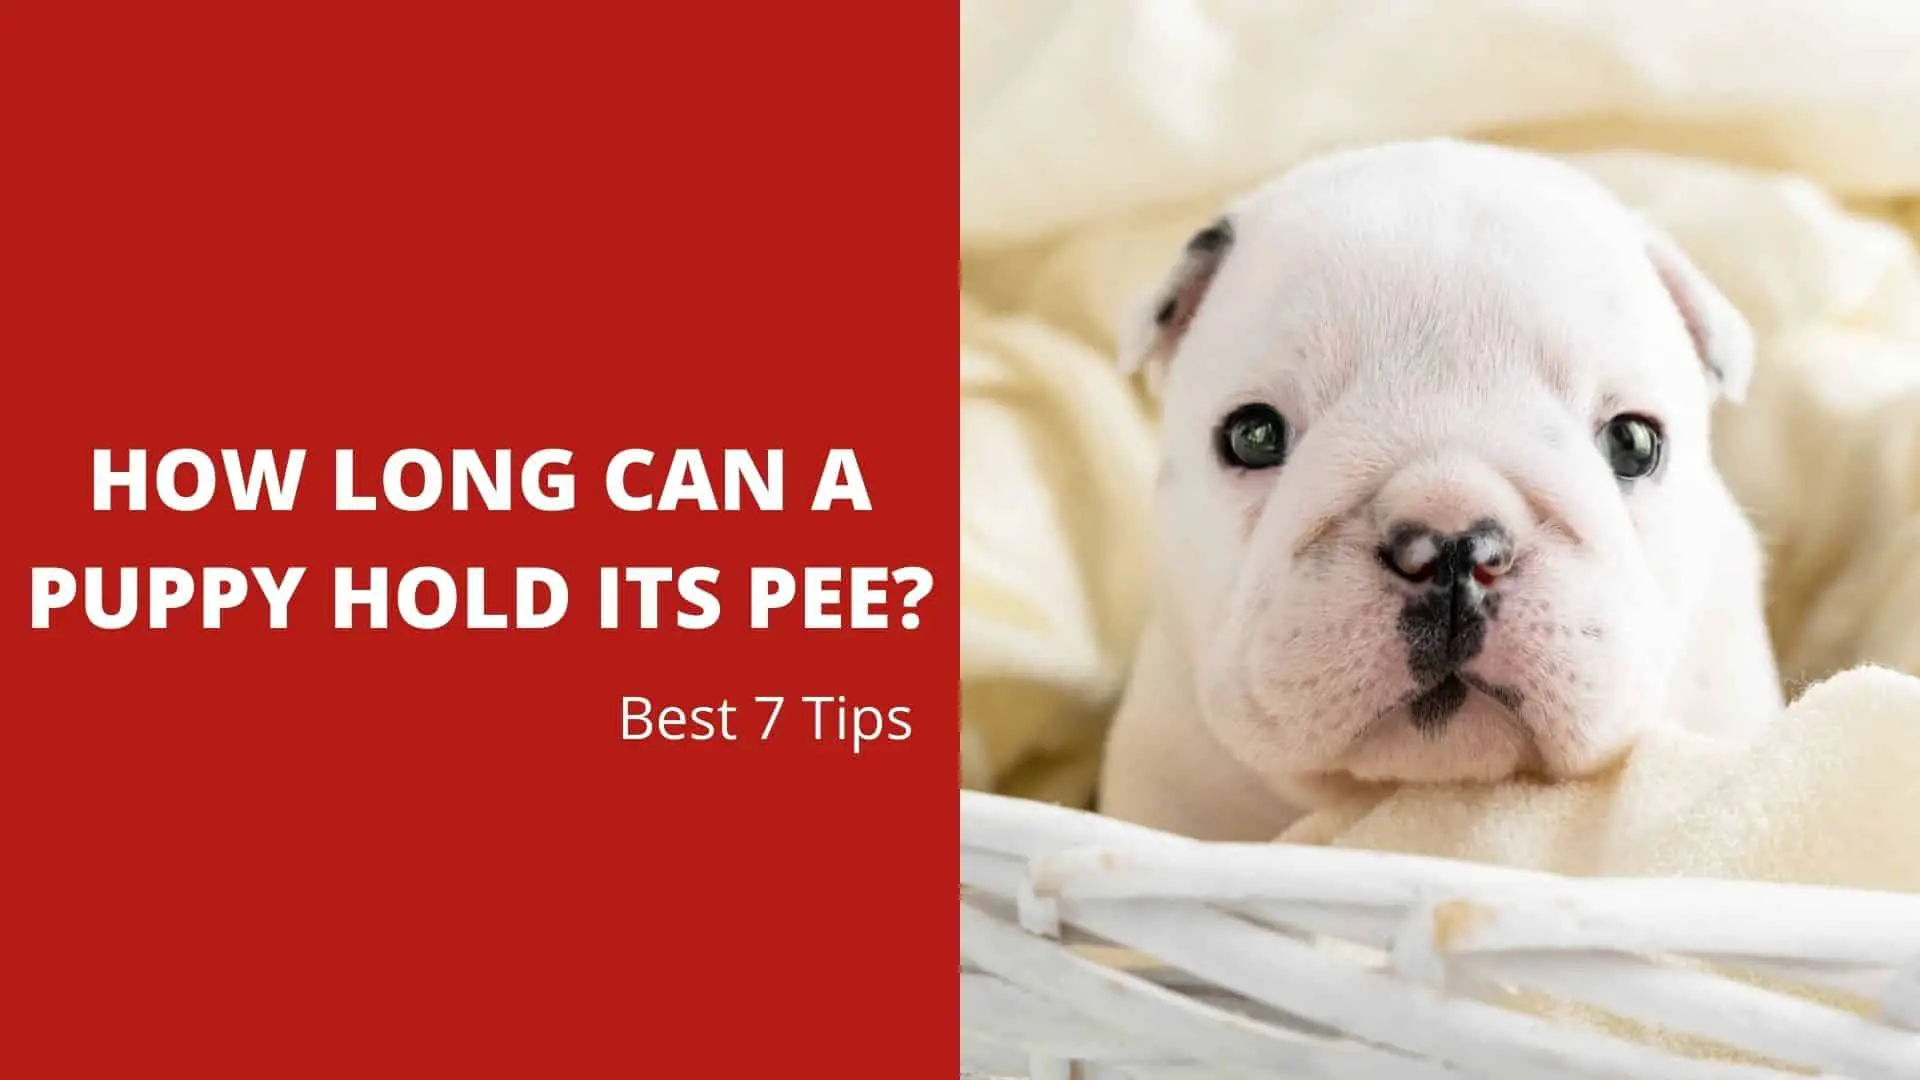 How Long Can A Puppy Hold Its Pee? Best 7 Tips